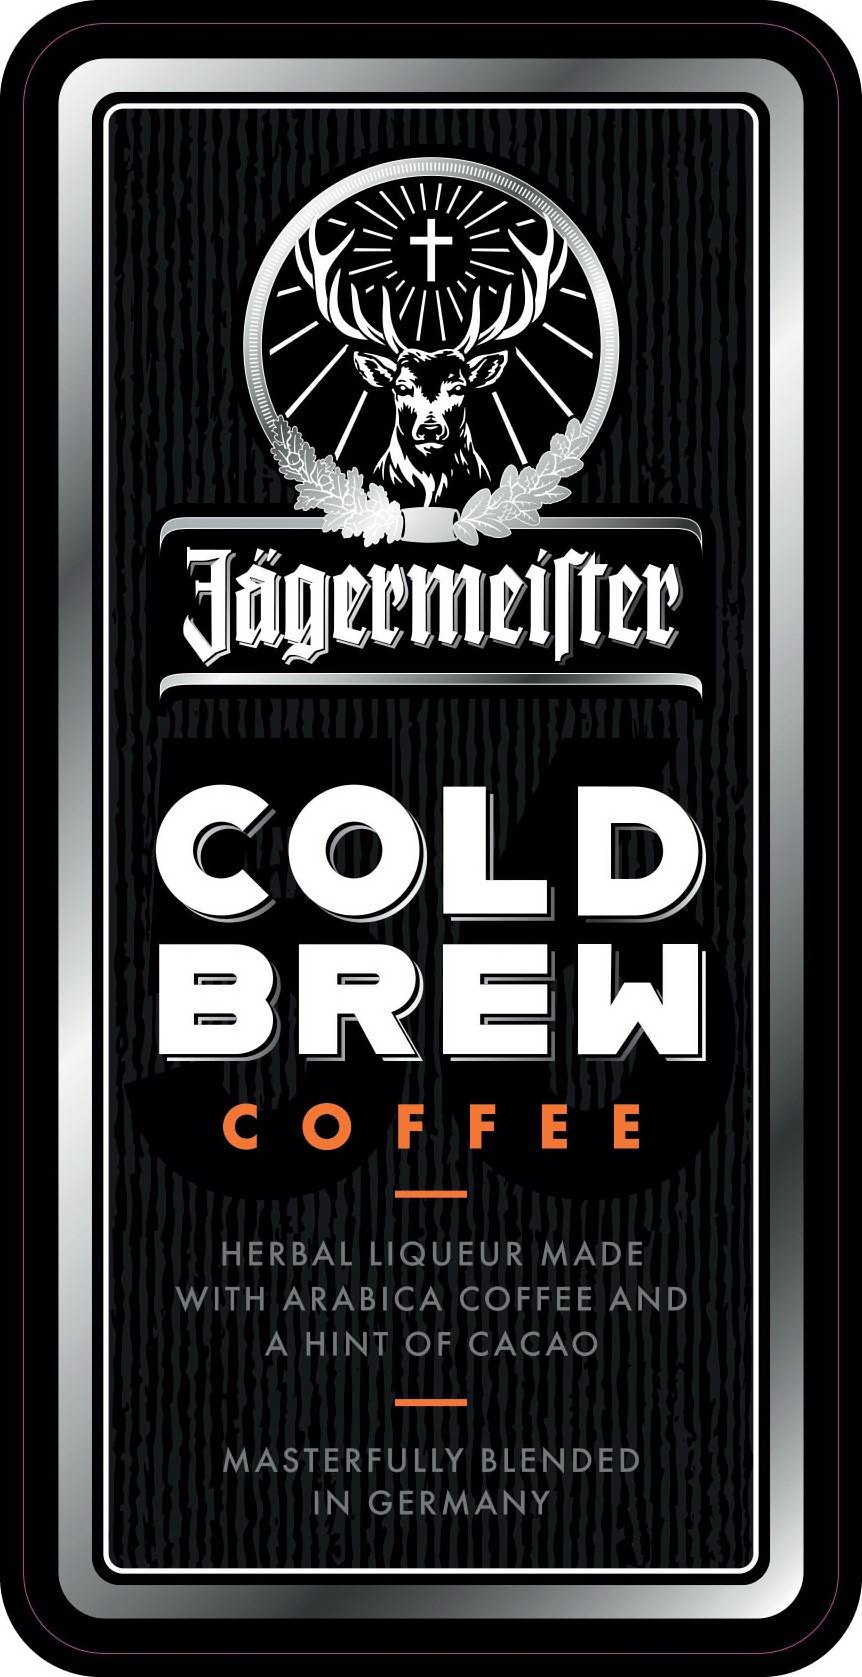 Trademark Logo JÄGERMEISTER COLD BREW COFFEE HERBAL LIQUEUR MADE WITH ARABICA COFFEE AND A HINT OF CACAO MASTERFULLY BLENDED IN GERMANY